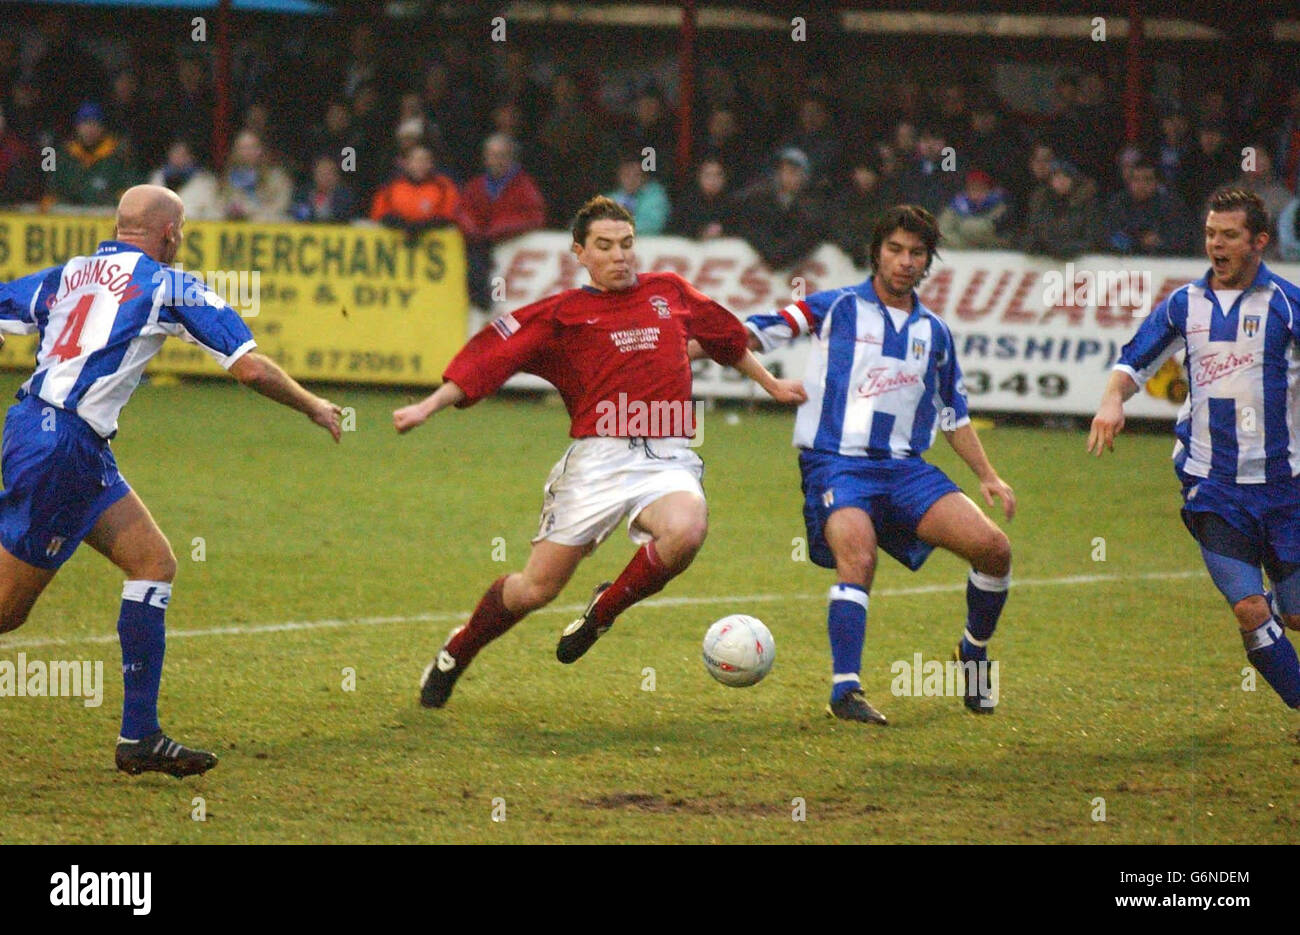 Rory Prendergast of Accrington Stanley (centre) splits the Colchester United defence during the FA Cup Third Round match at Interlink Express Stadium, Accrington. NO UNOFFICIAL CLUB WEBSITE USE. Stock Photo